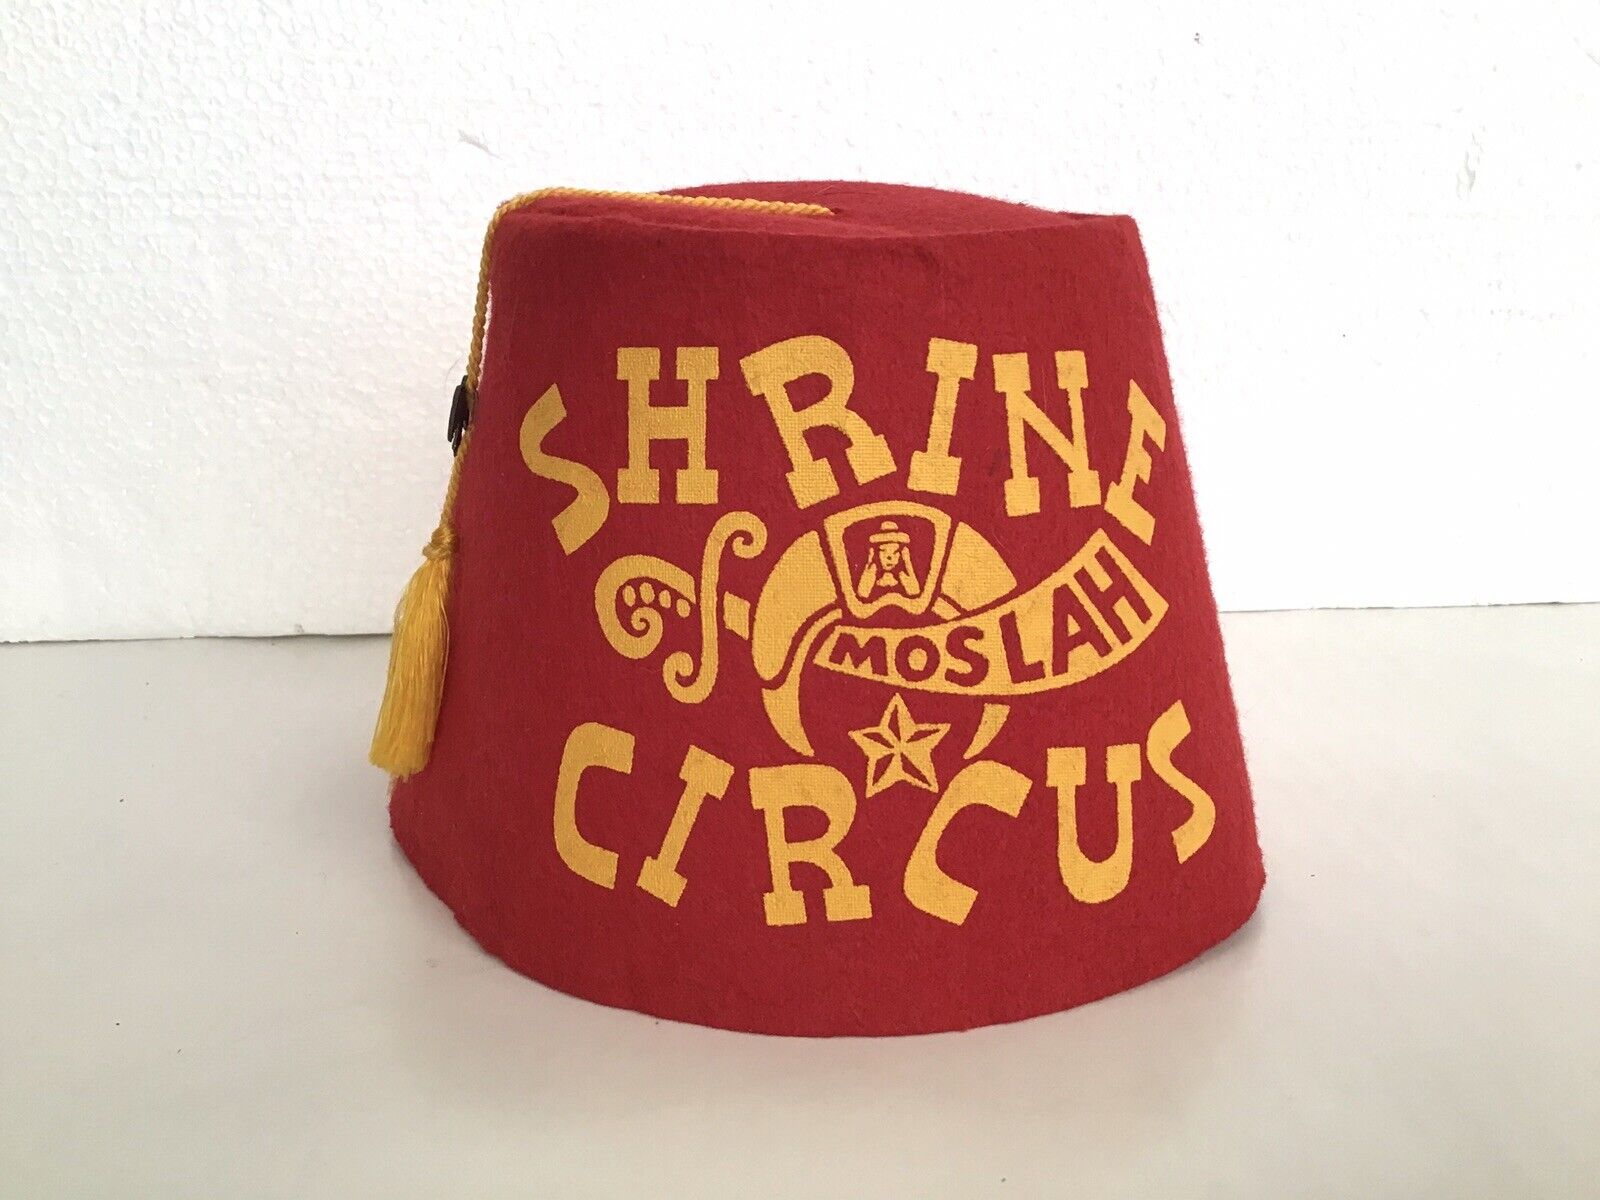 1960’s MOSLAH TEMPLE SHRINE CIRCUS FORT WORTH, TEXAS RED FEZ SOUVENIR HAT